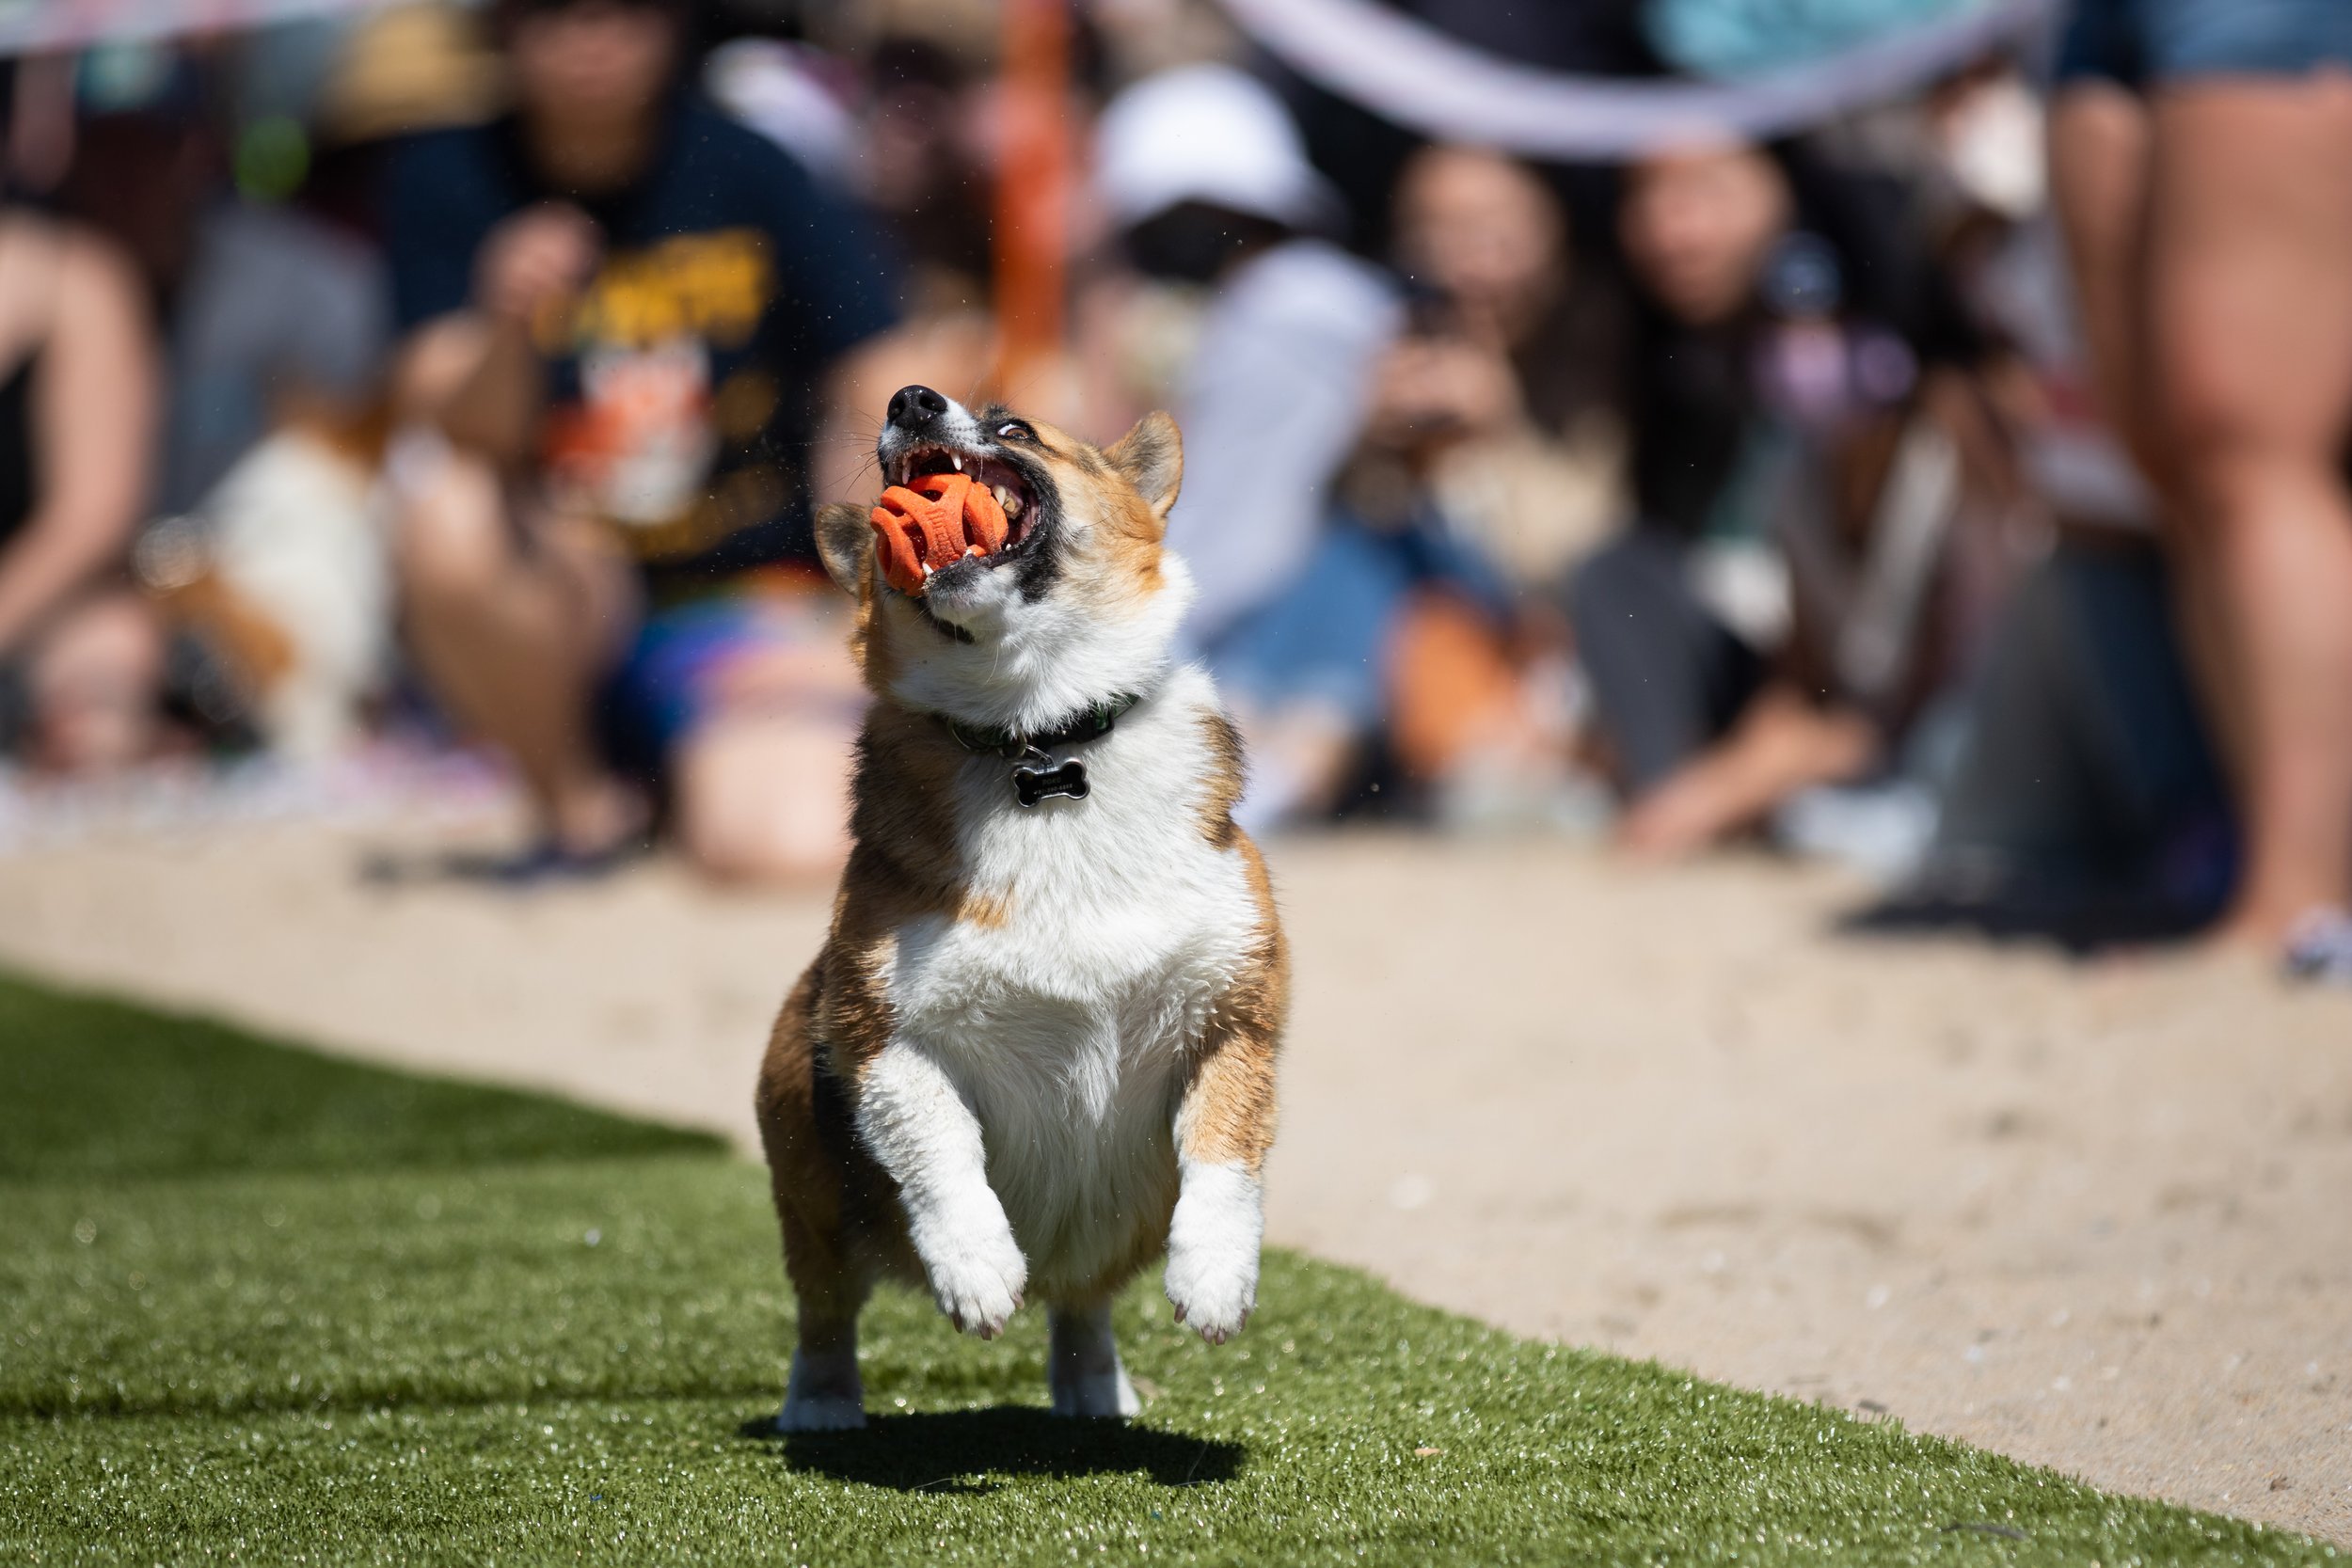  The first contestant catching a ball and scoring a point in the Fetch Fanatic Contest during Corgi Beach Day at Huntington Dog Beach, Huntington Beach, Calif., on Saturday, April 1, 2023. They ended up in tied second place, with five balls caught in